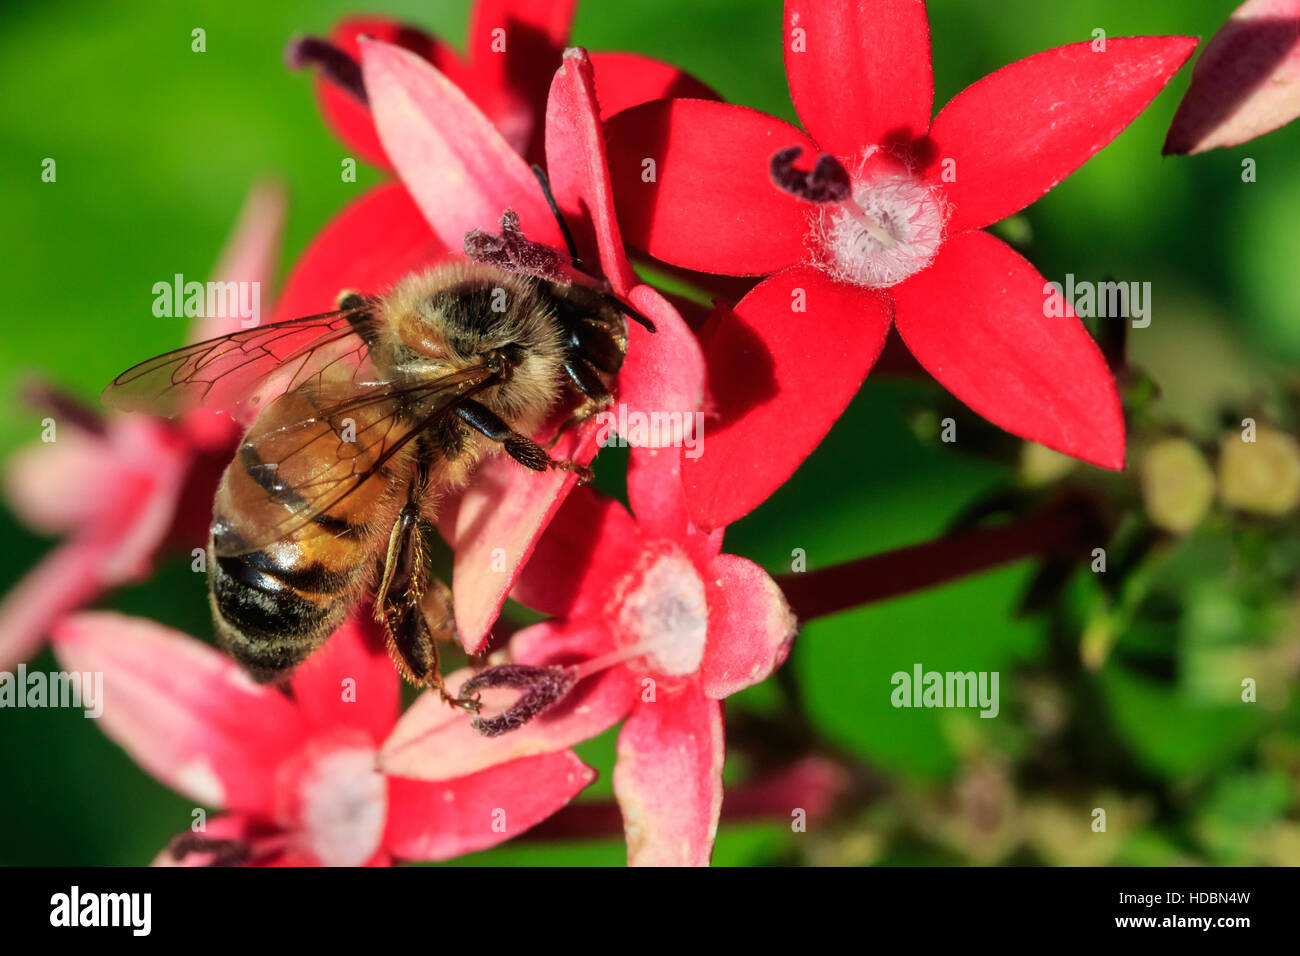 A larger bumble bee sitting on some backyard flowers. Stock Photo